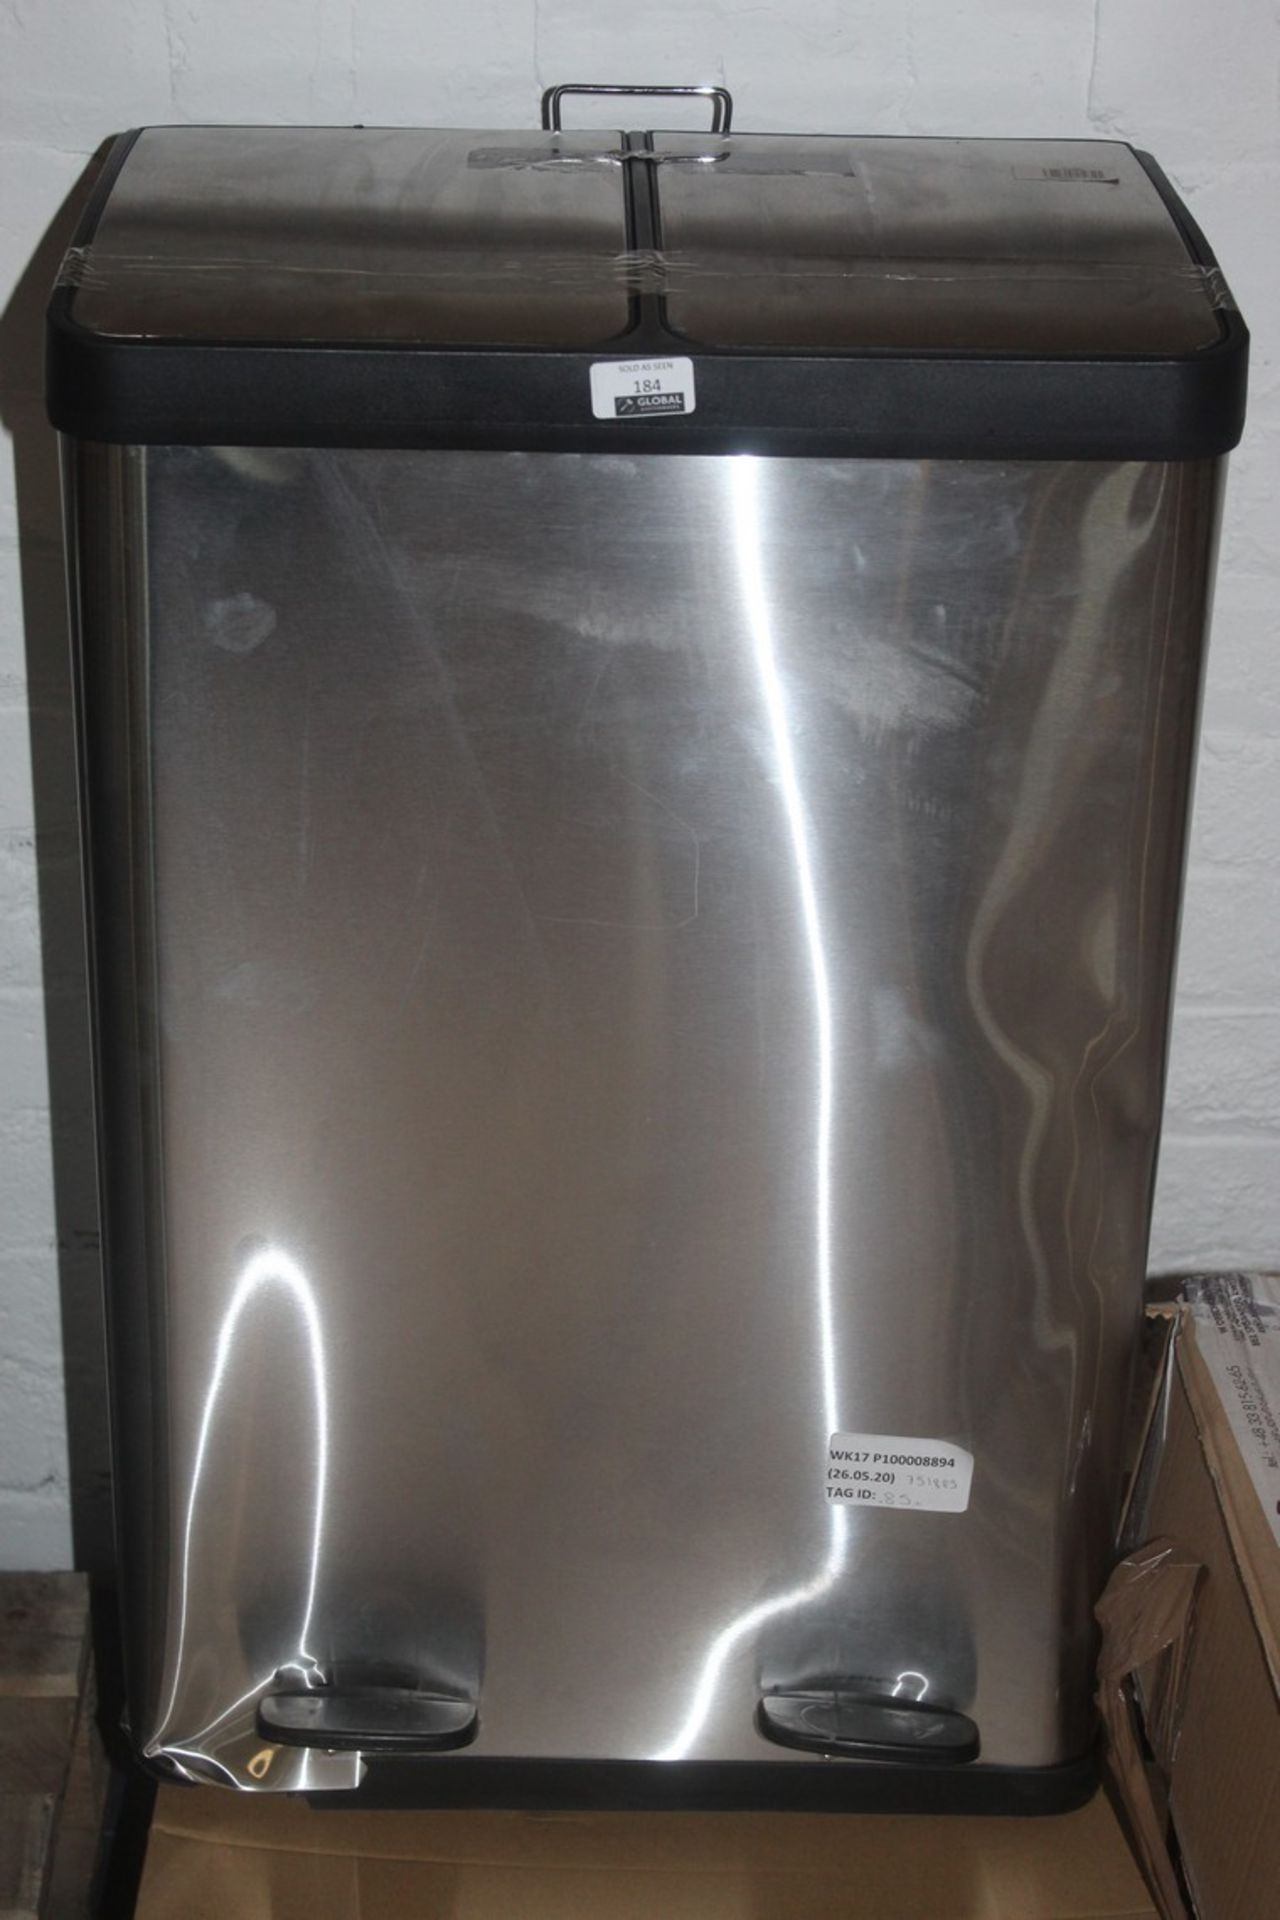 Stainless Steel Twin Recycling 60 Litre Pedal Bin RRP £85 (751885) (Pictures For Illustration